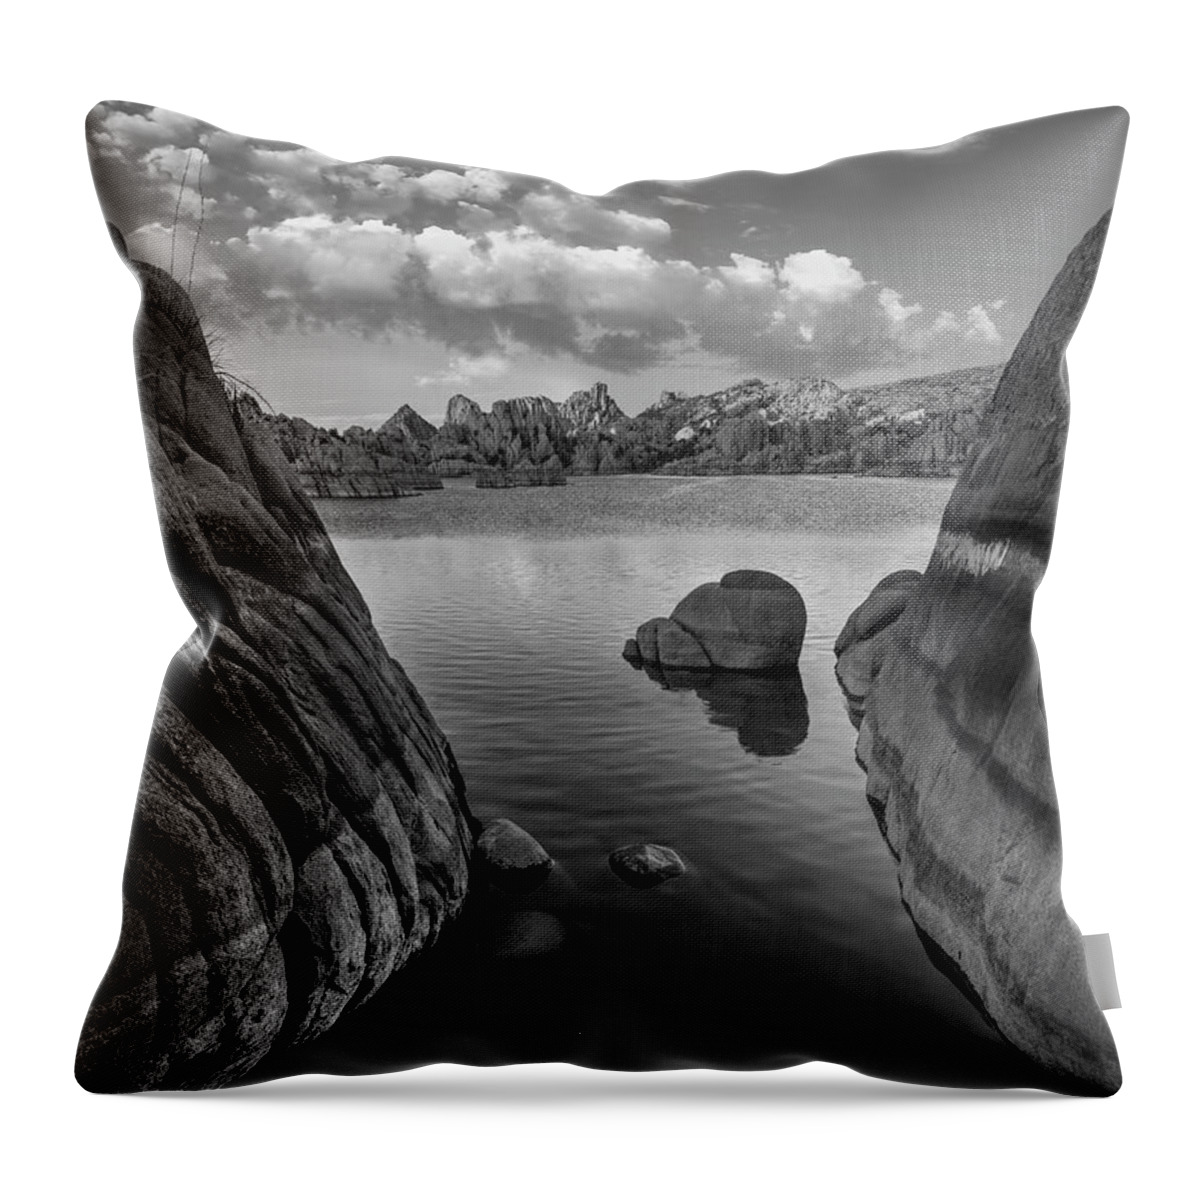 Disk1216 Throw Pillow featuring the photograph Watson Lake, Arizona by Tim Fitzharris